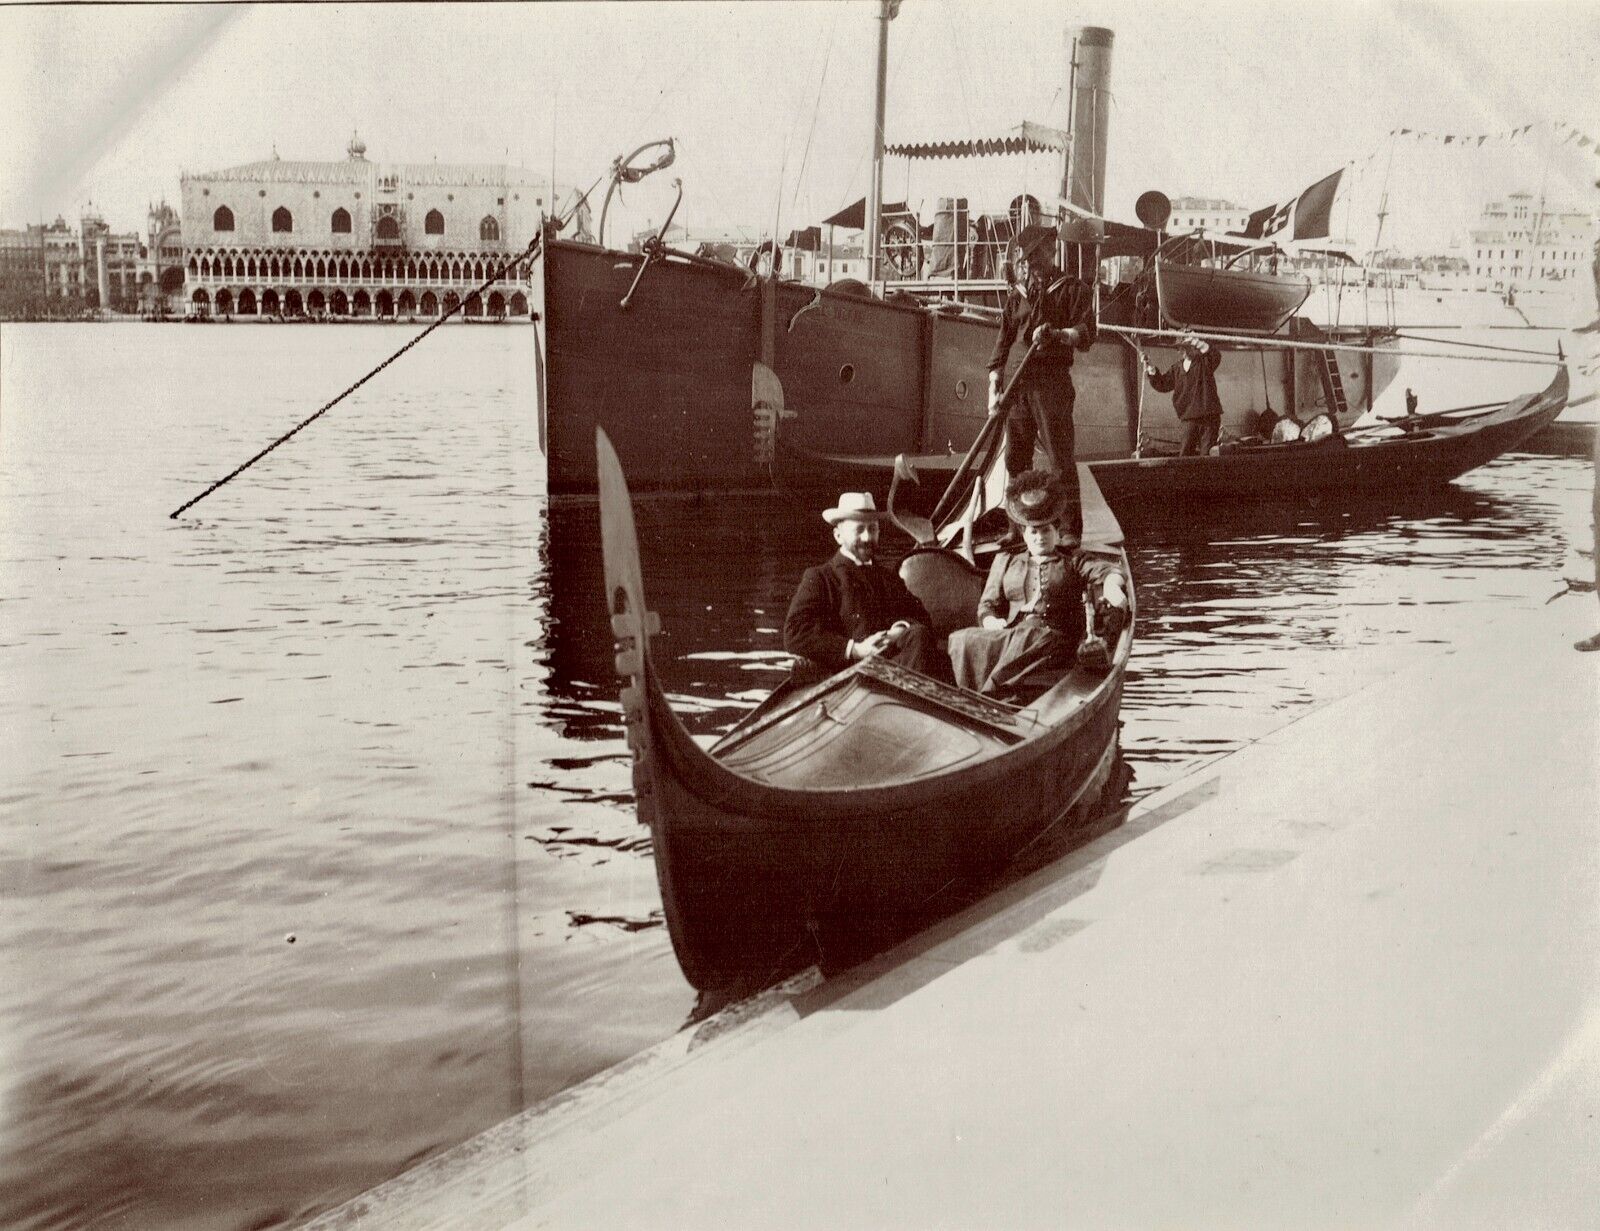 ITALY VENISE - year 1906 in gondola in front of St. George Major